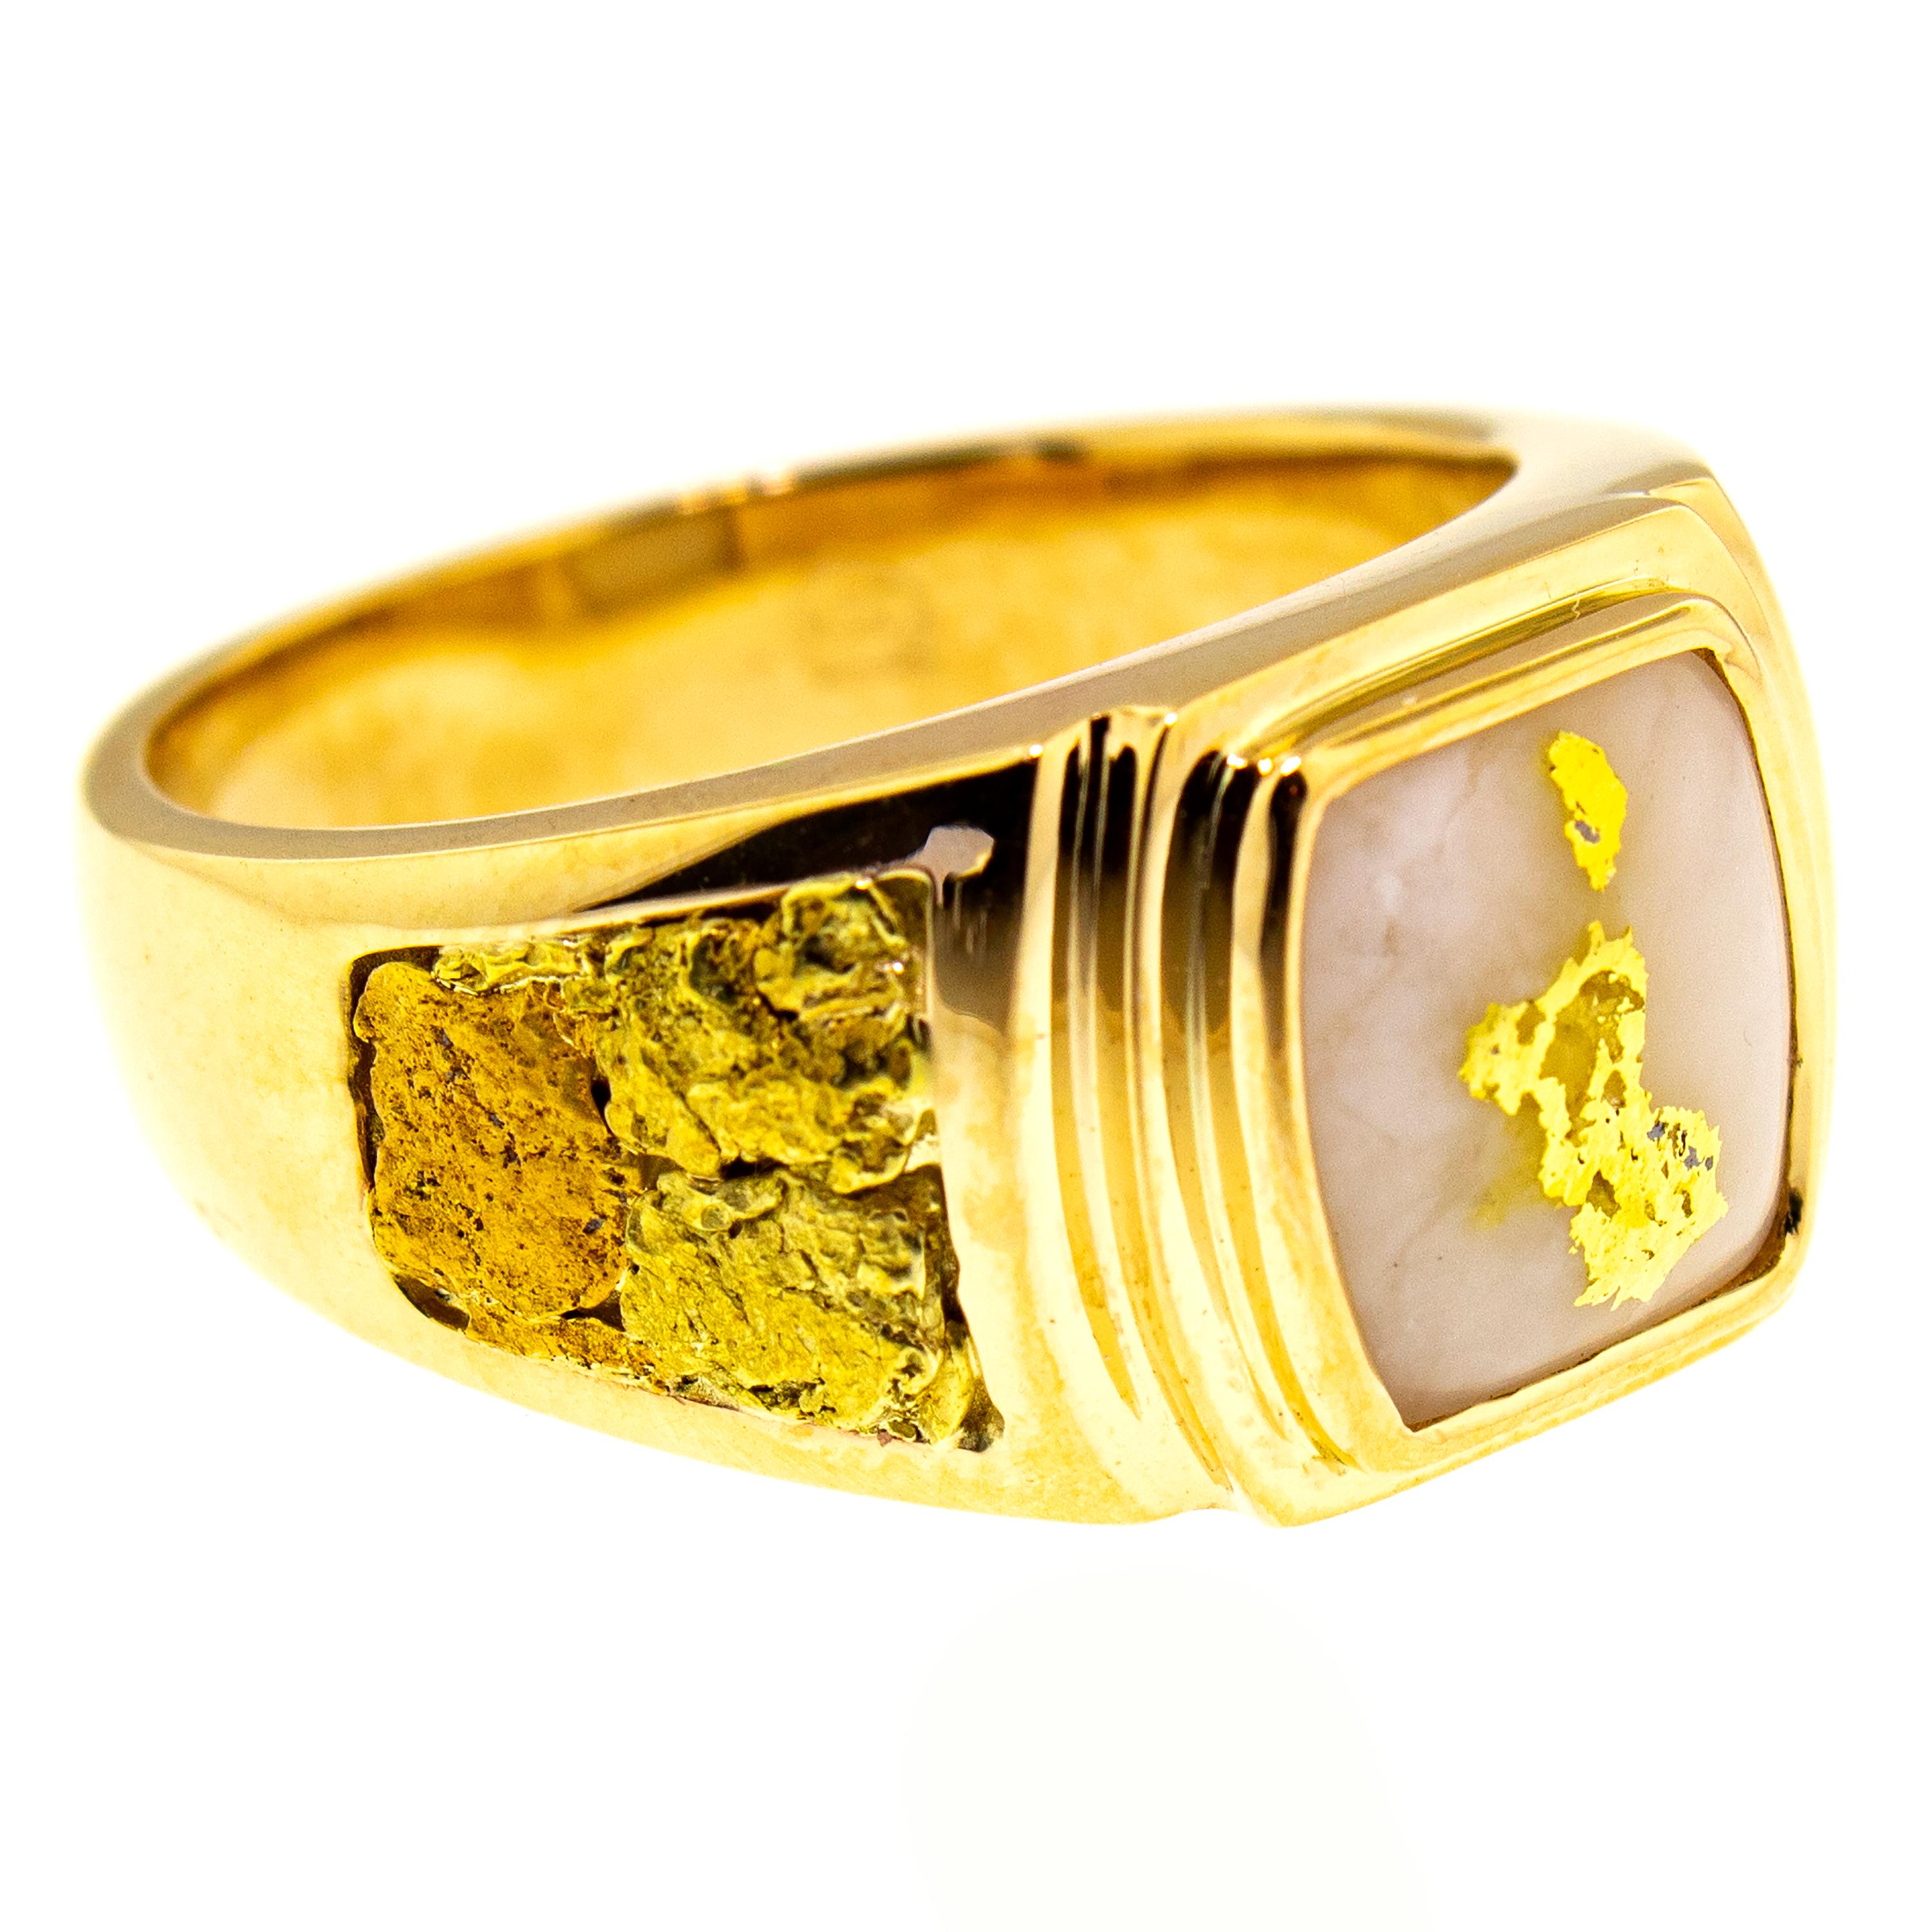 Exquisitely rare natural gold bearing quartz and gold nuggets are the focal points of this elegant and unique men's ring. The classic shape and styling are a perfect frame for the natural material choices, and the vivid color of the two types of